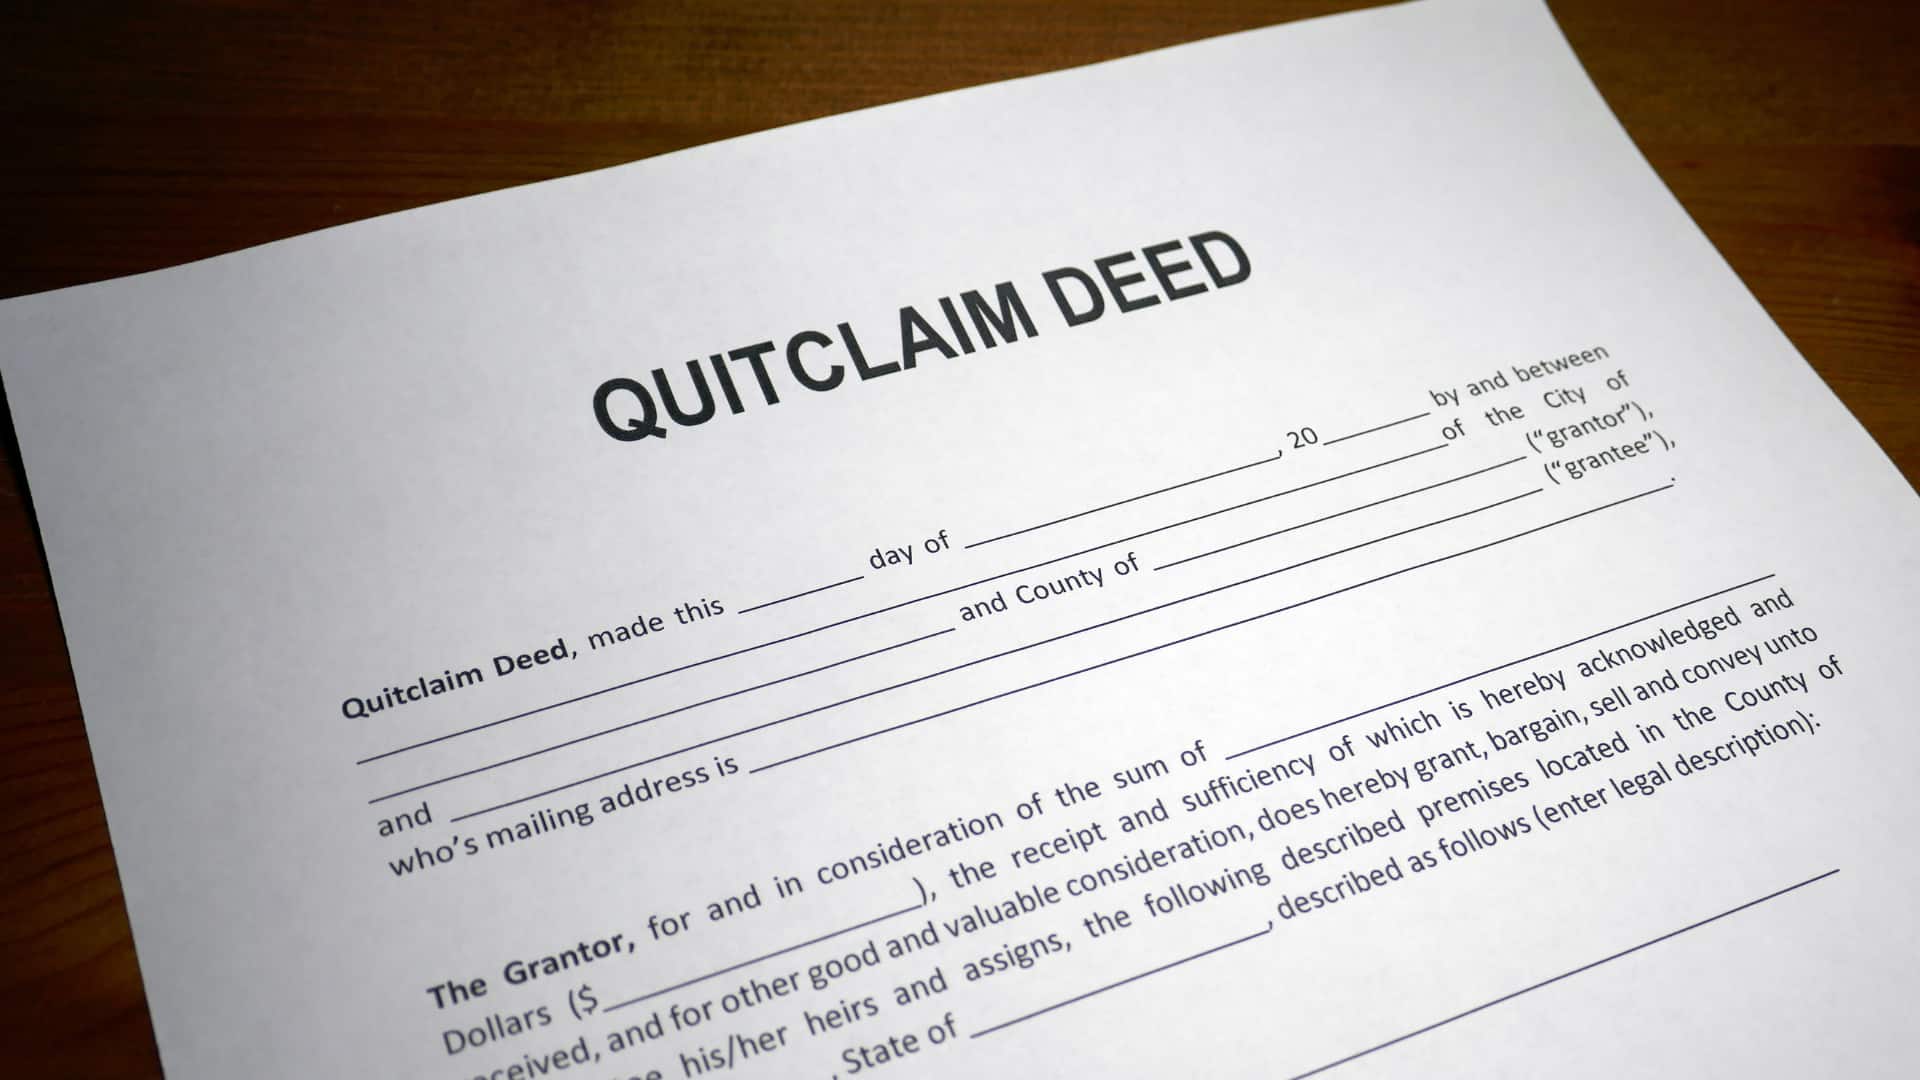 An image of a quit claim deed document.